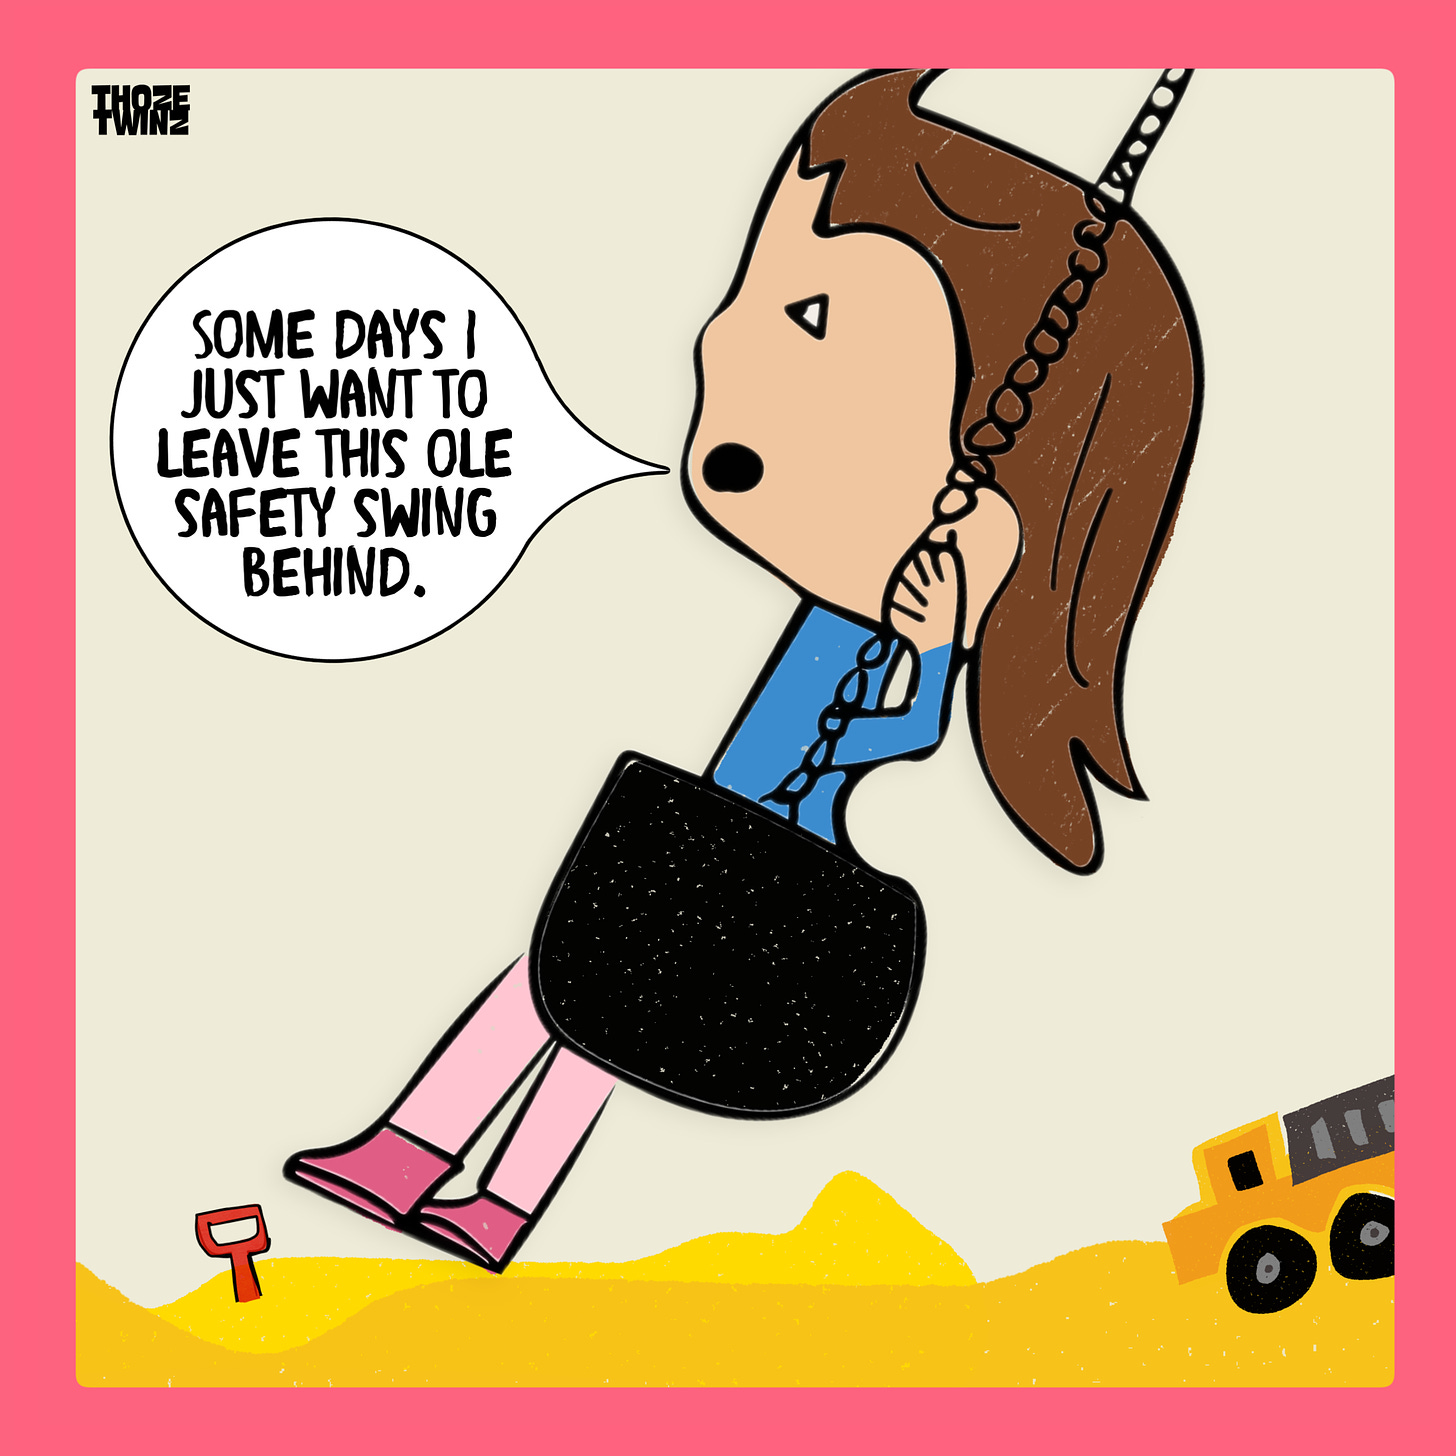 A cartoon about a toddler in a safety swing longing for the day when she will be free to use the big-kid swings